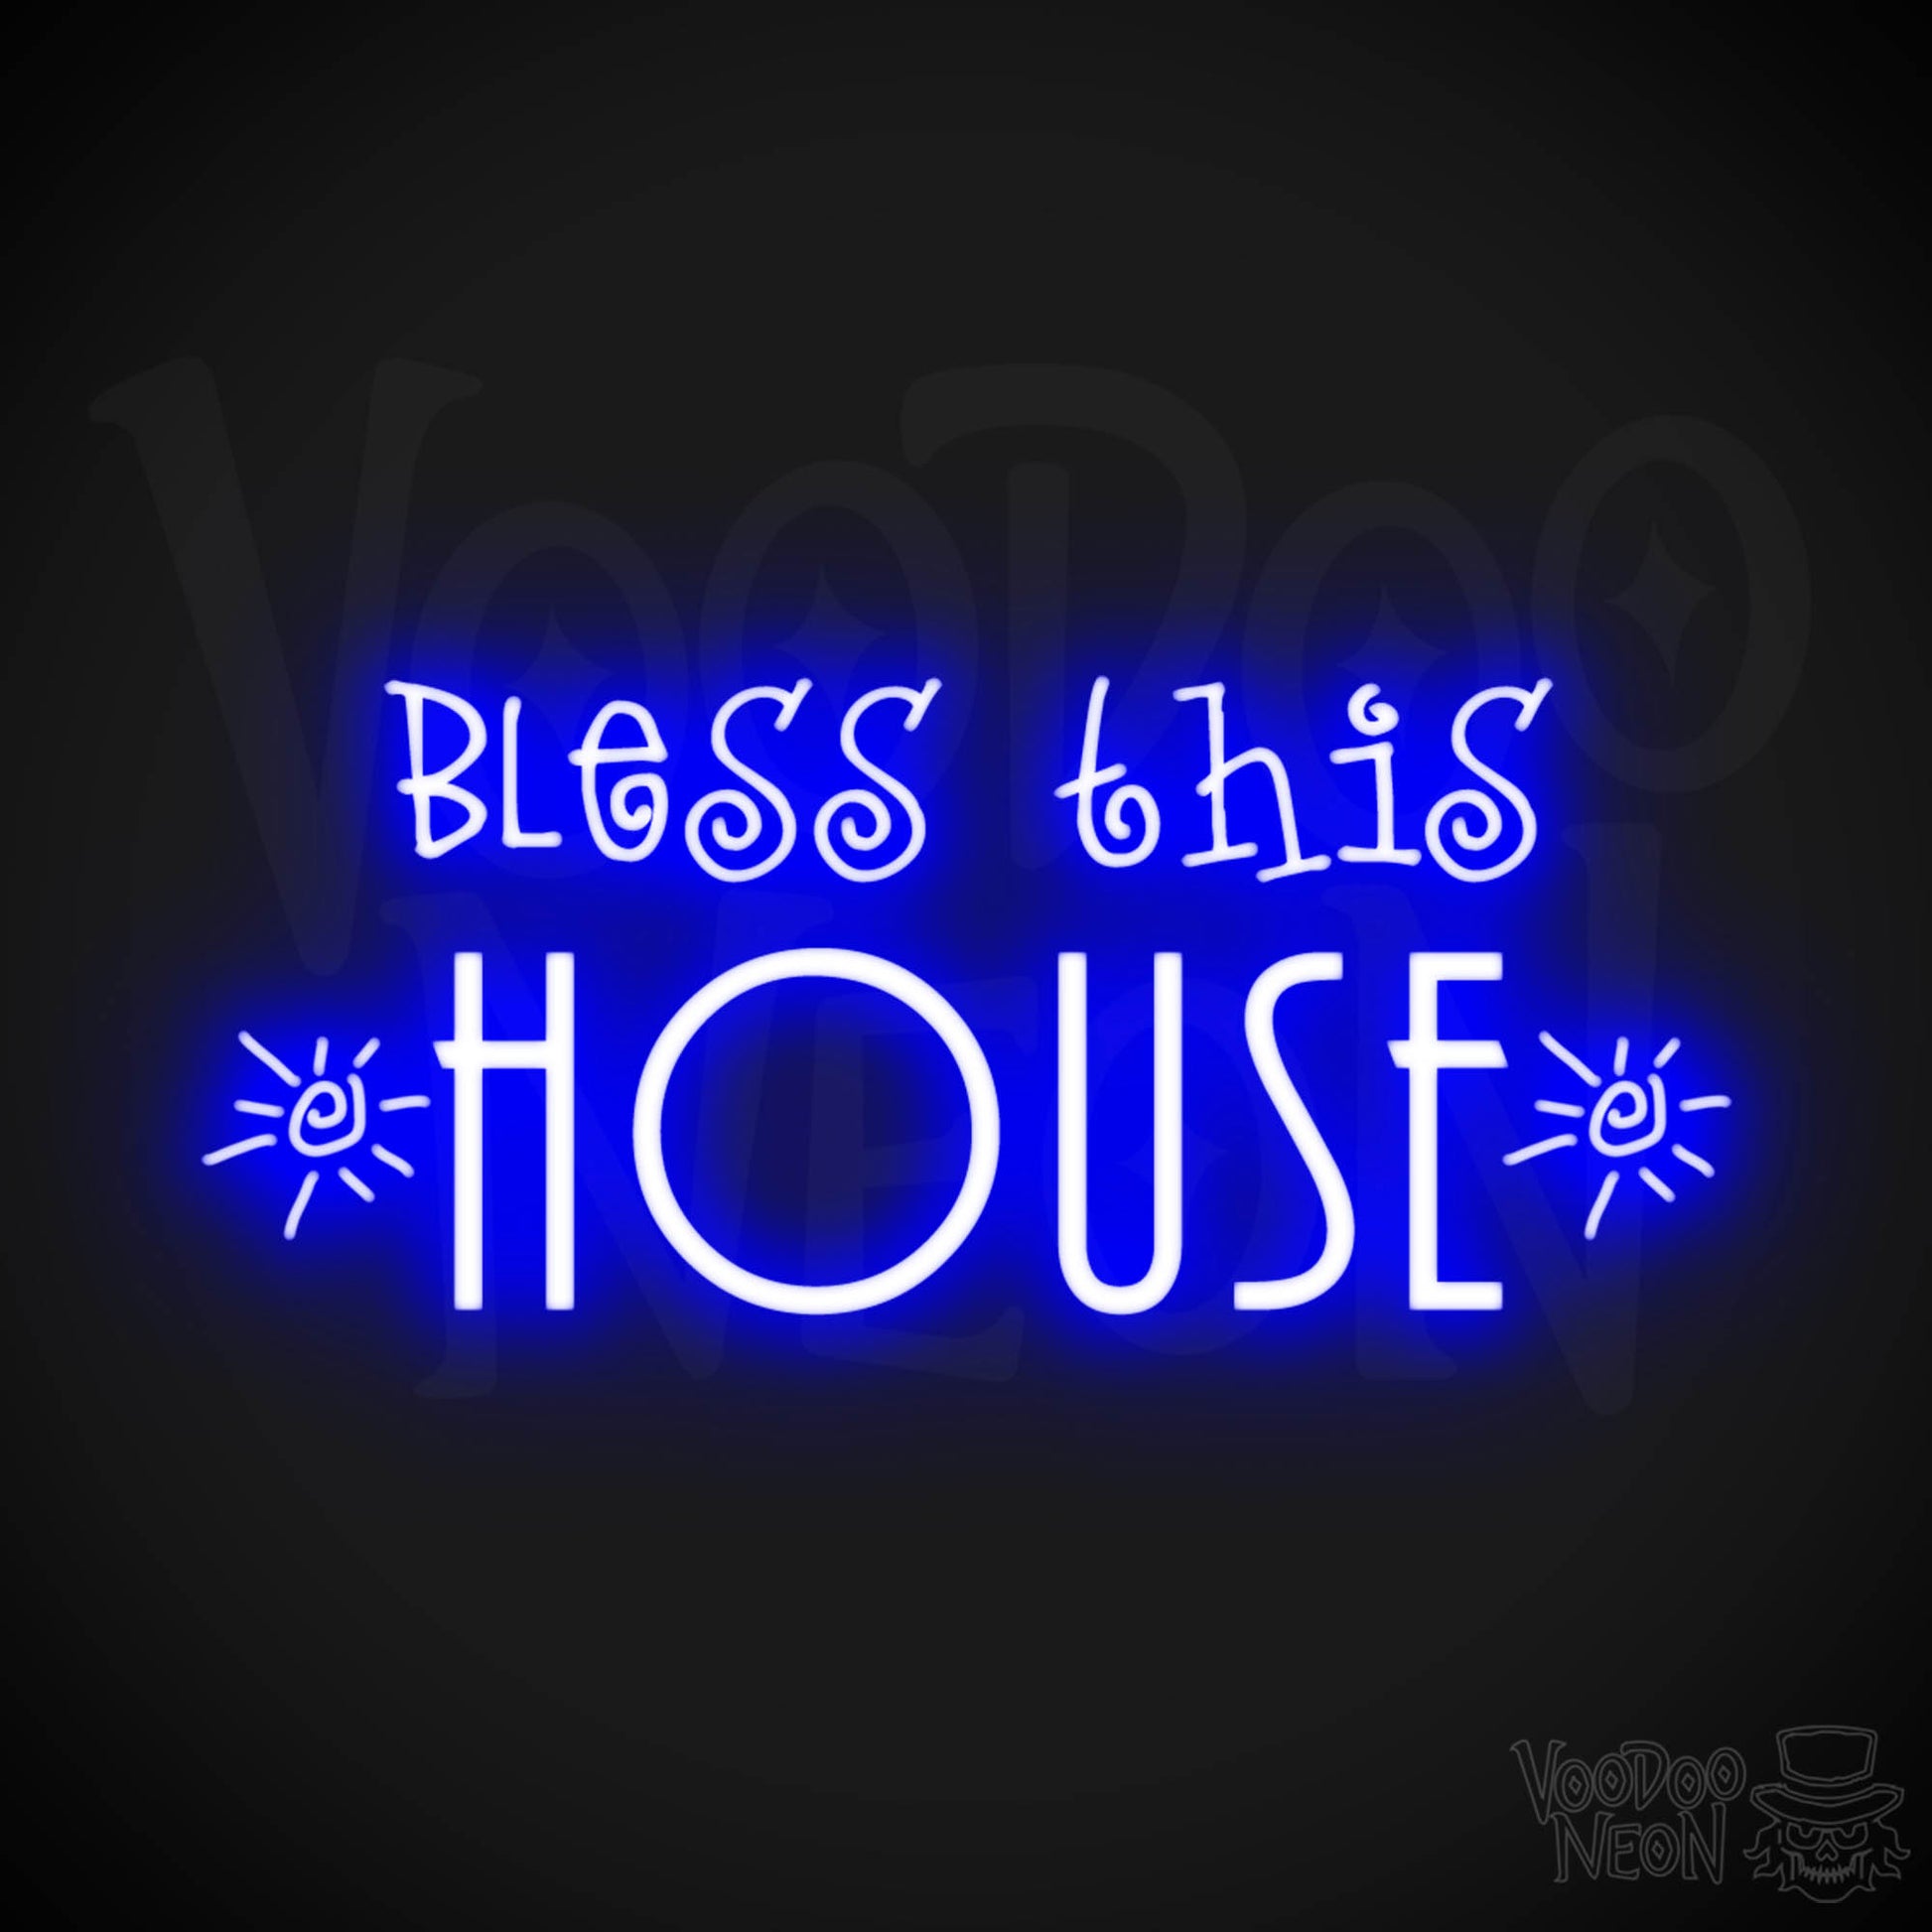 Bless This House Neon Sign - Neon Bless This House Sign - LED Light Up Sign - Color Dark Blue